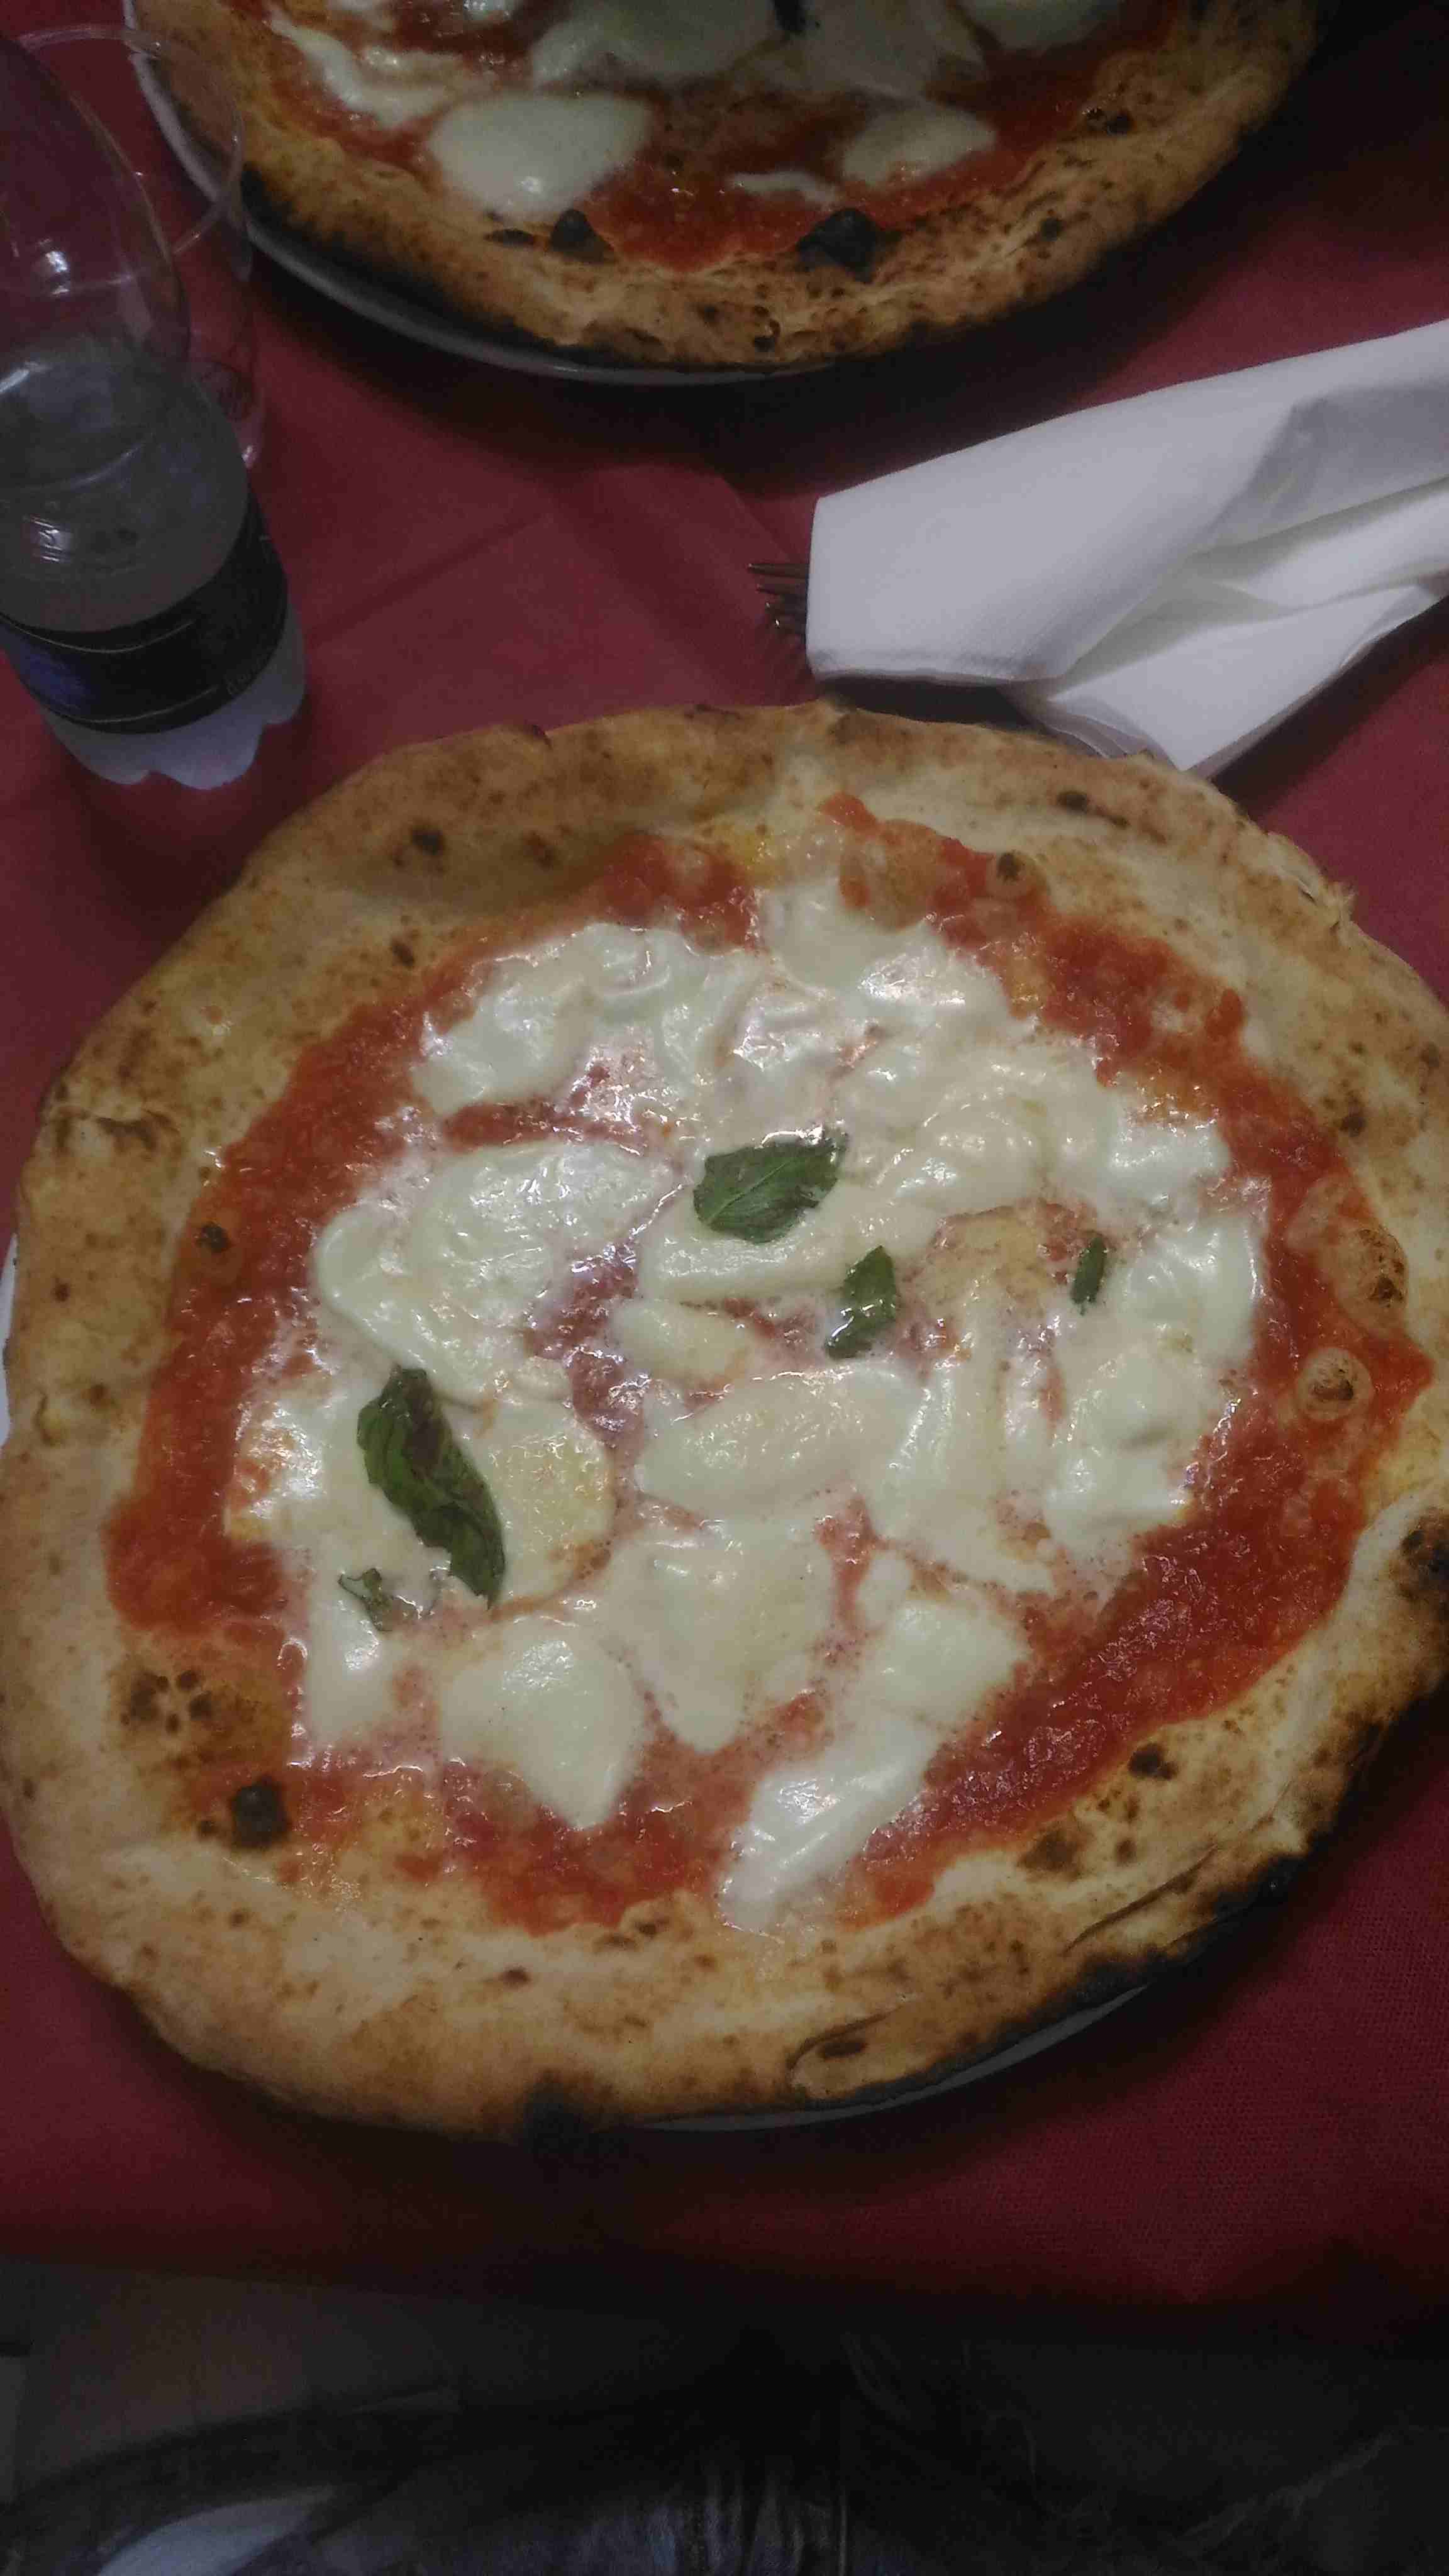 A margherita with lots of mozzarella.